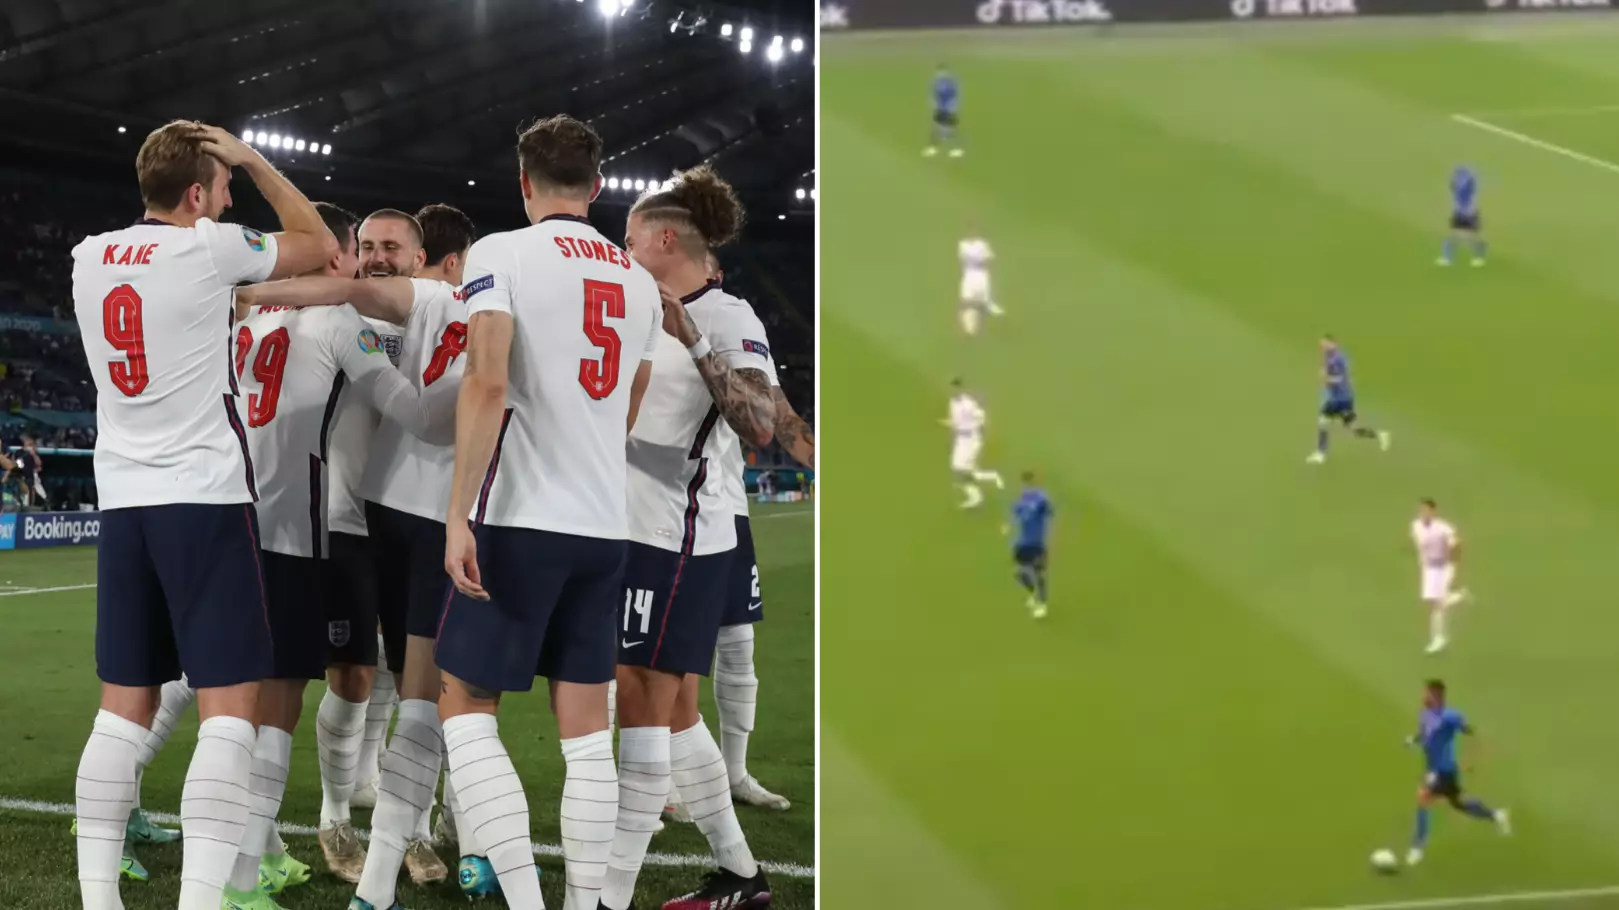 England Fans Sing 'It's Coming Home', Italy And Spain Supporters Respond By Booing